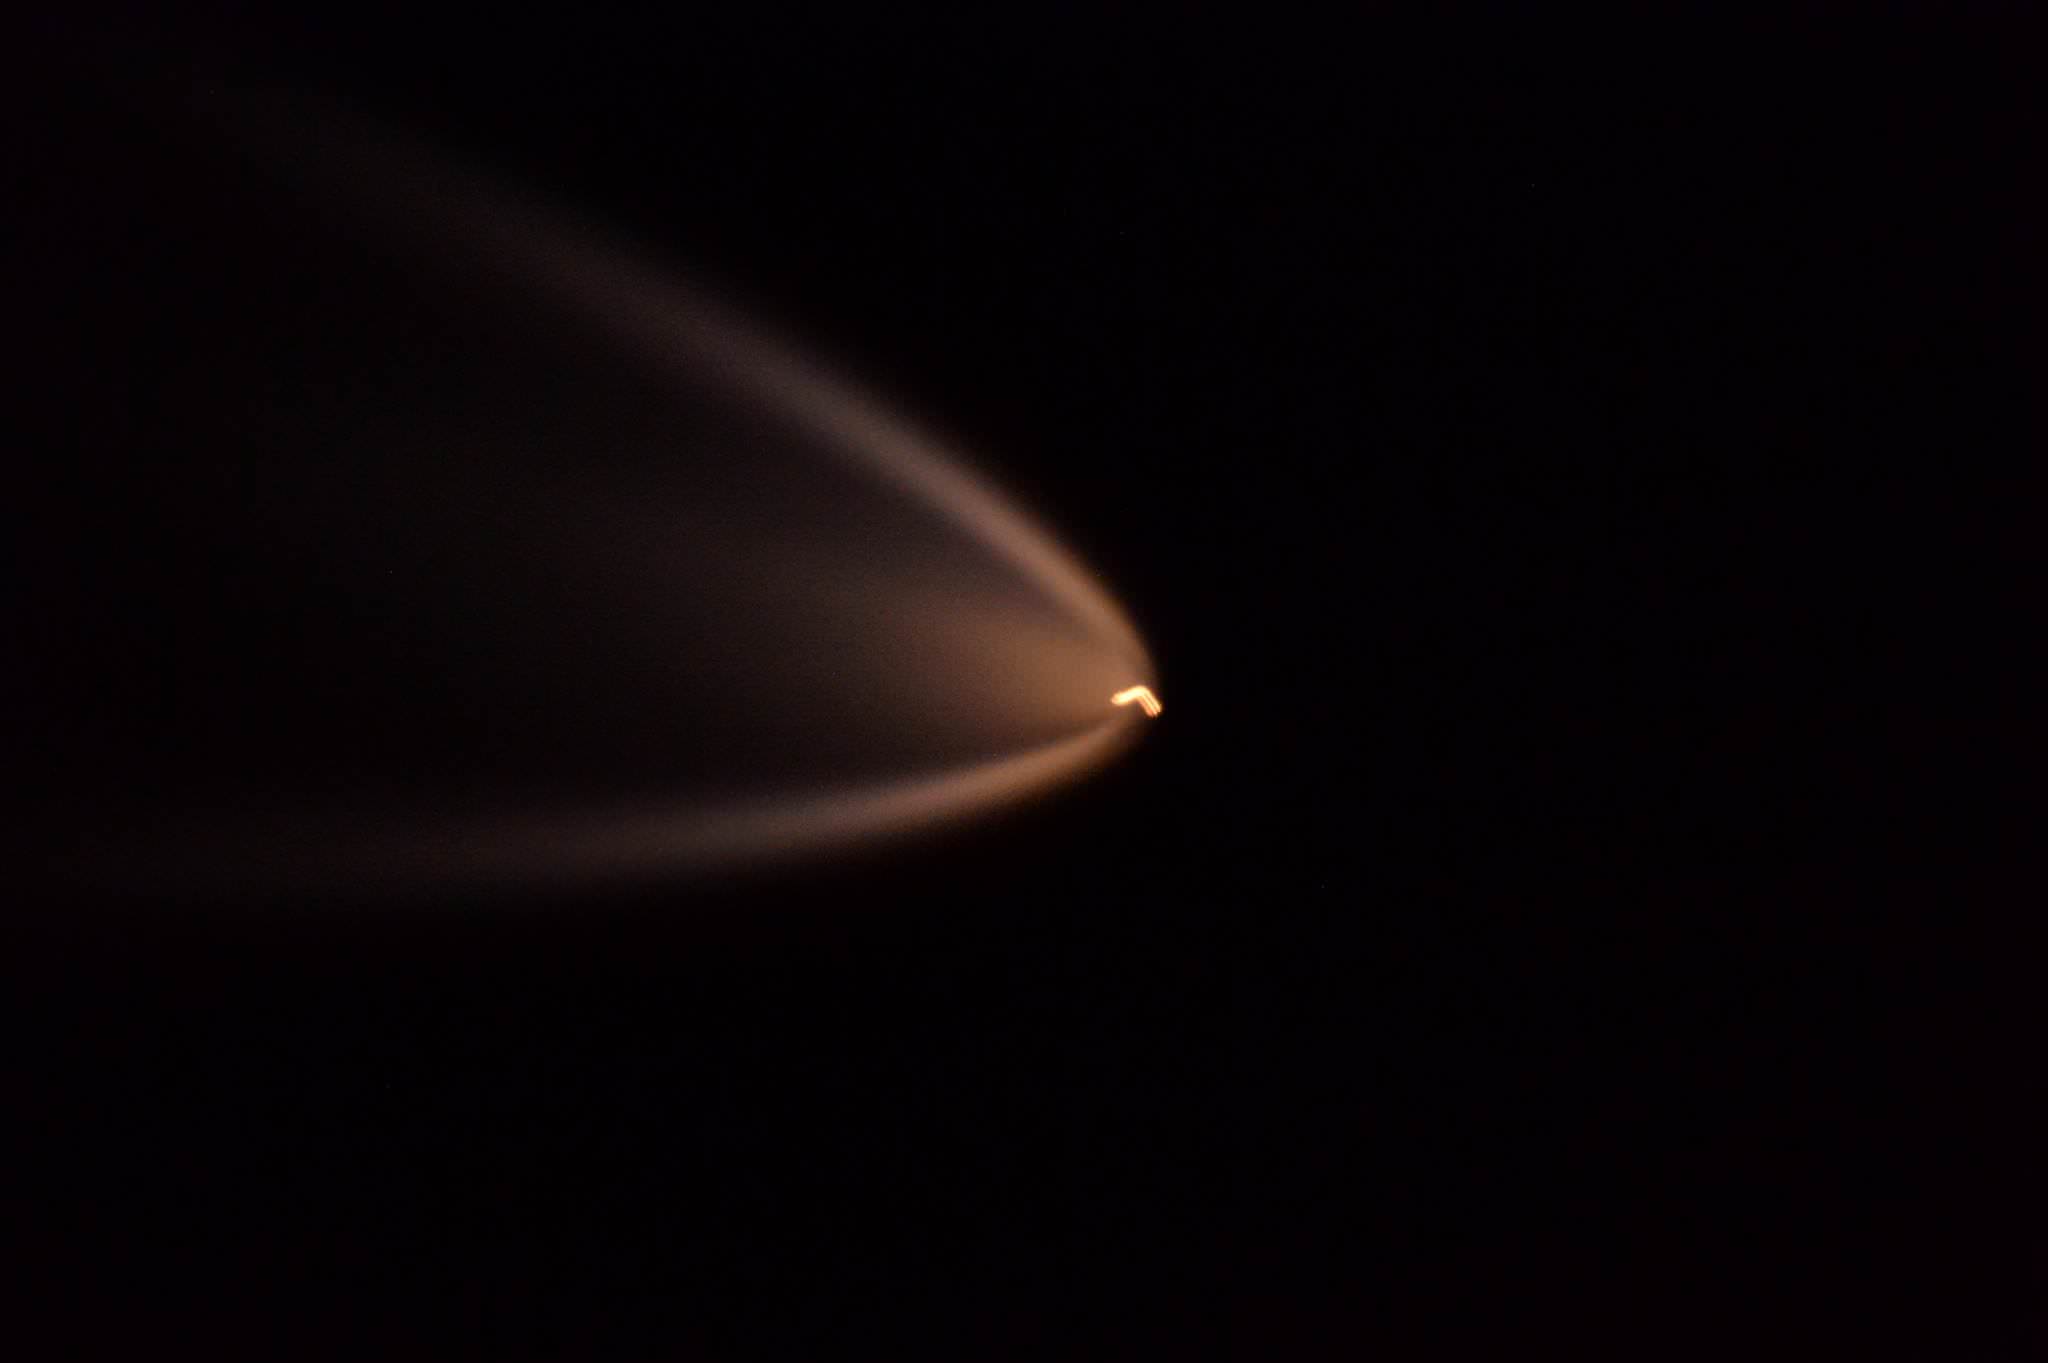 The Russian Progress 63 spacecraft launch on a Soyuz booster to the International Space Station on March 31, 2016, as photographed by NASA astronaut and Expedition 47 crew member Jeff Williams from onboard the orbiting outpost.  Credit: NASA/Jeff Williams 